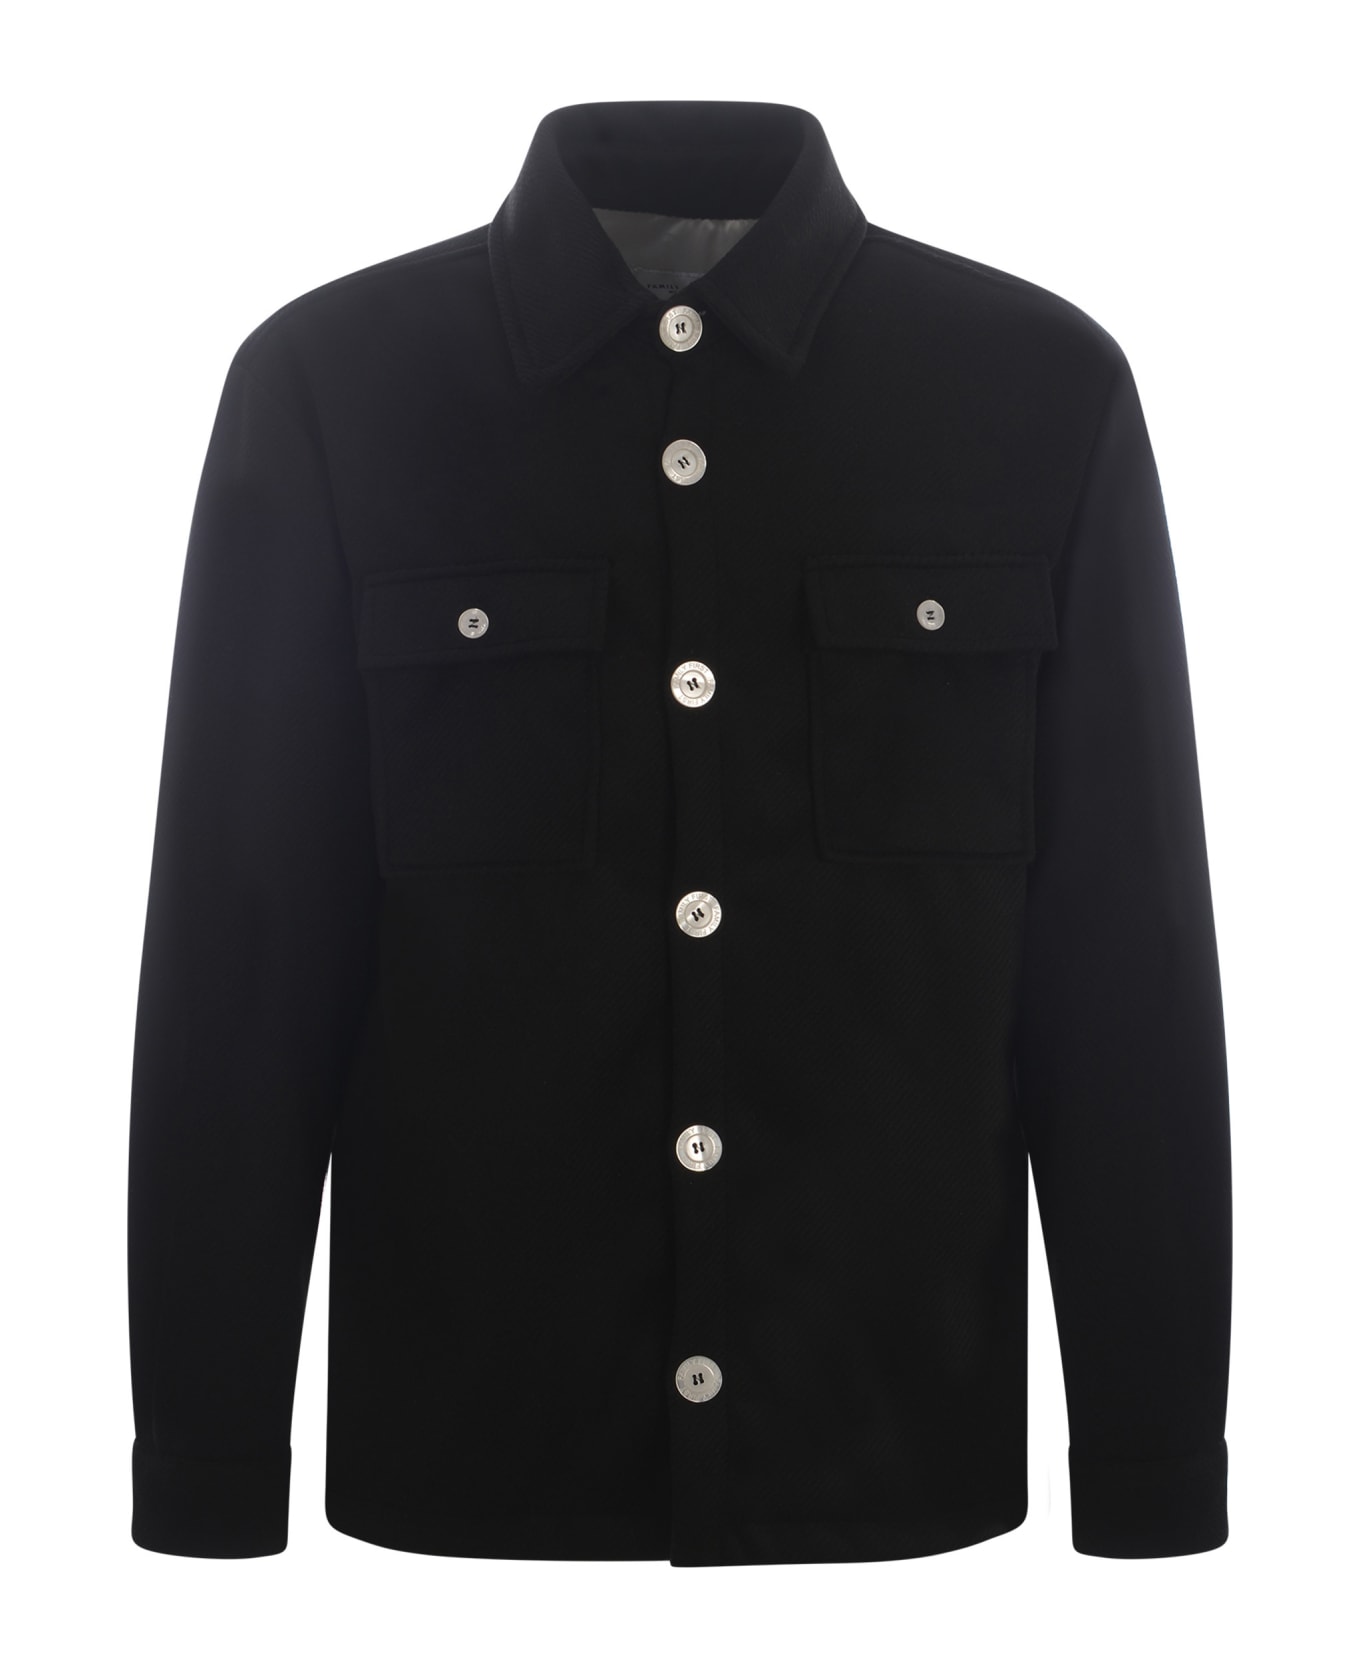 Family First Milano Shirt Jacket Family First In Terry Fabric - Nero